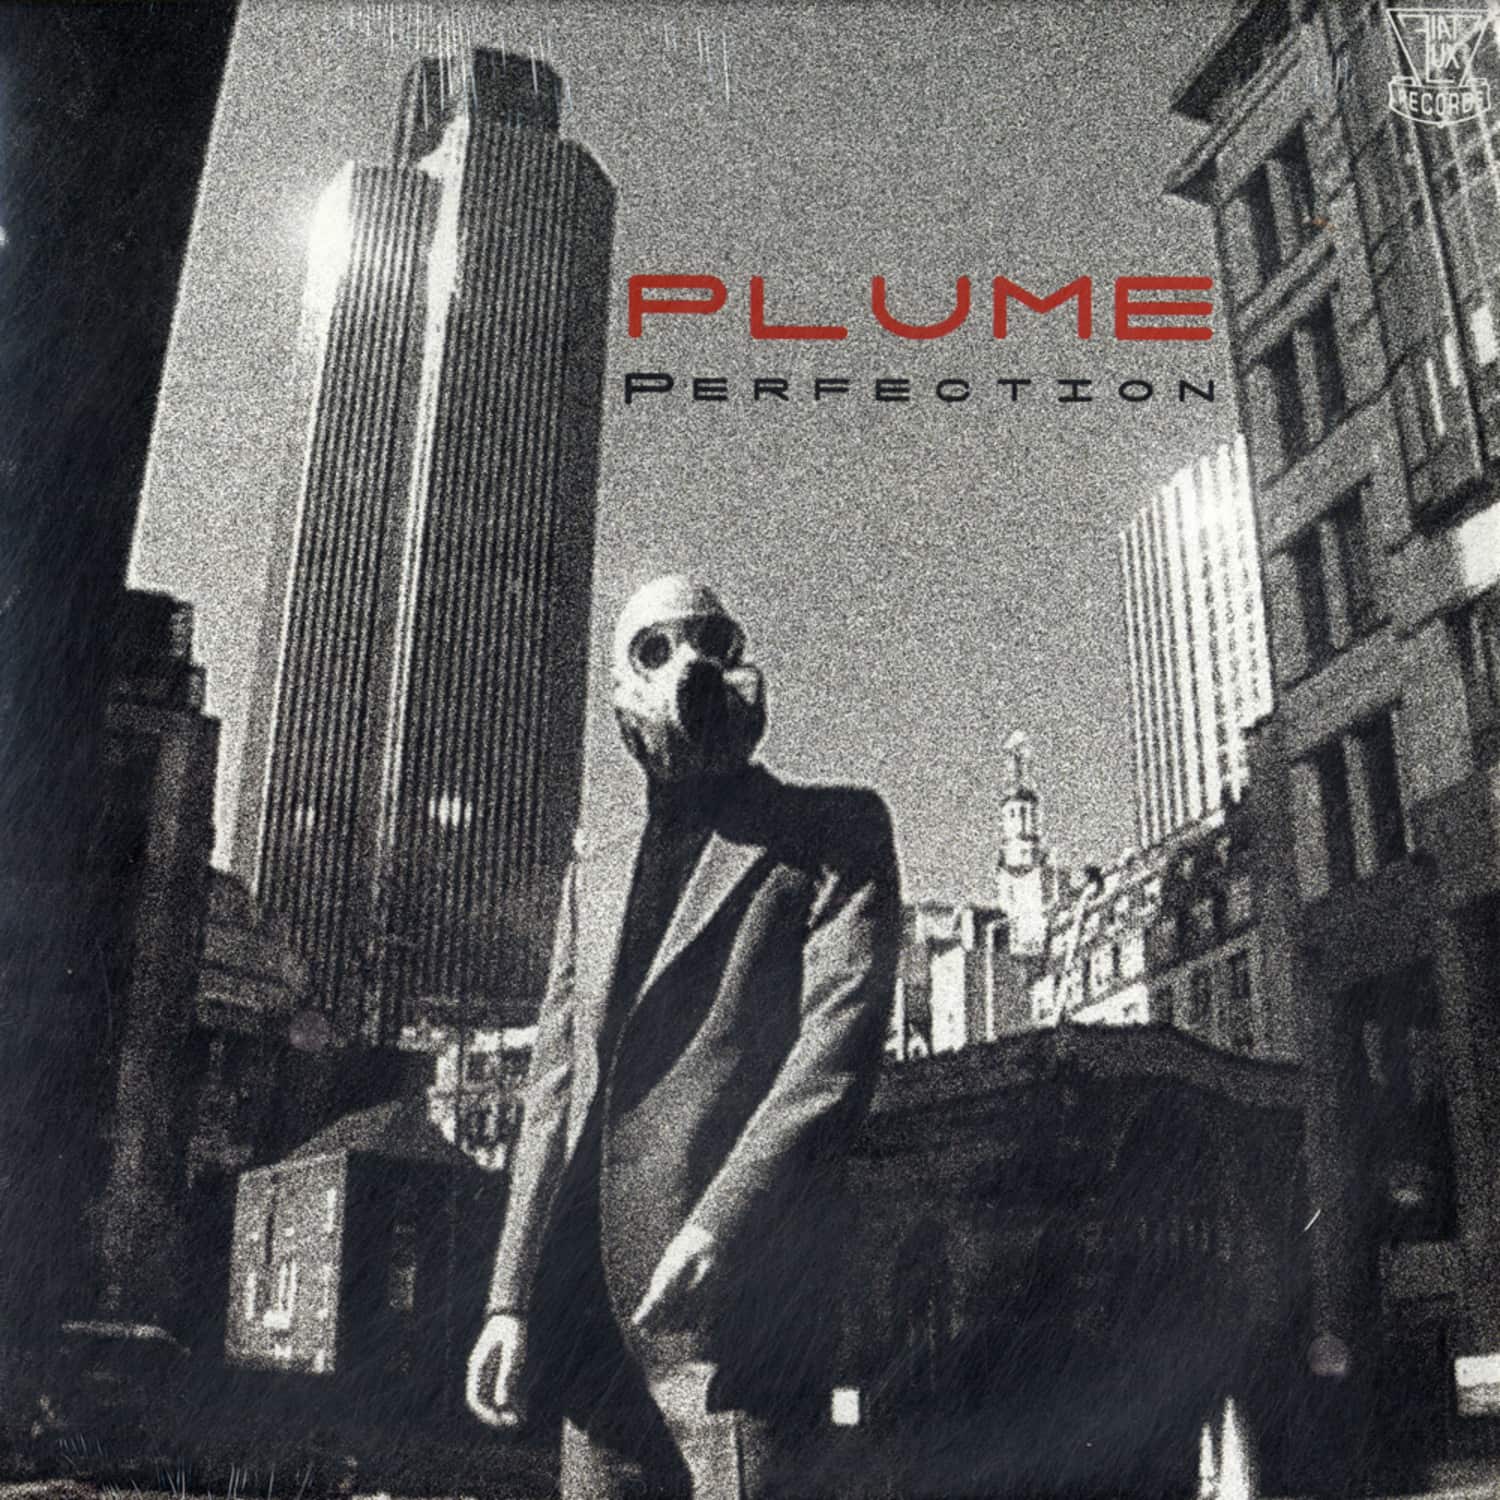 Plume - PERFECTION ep